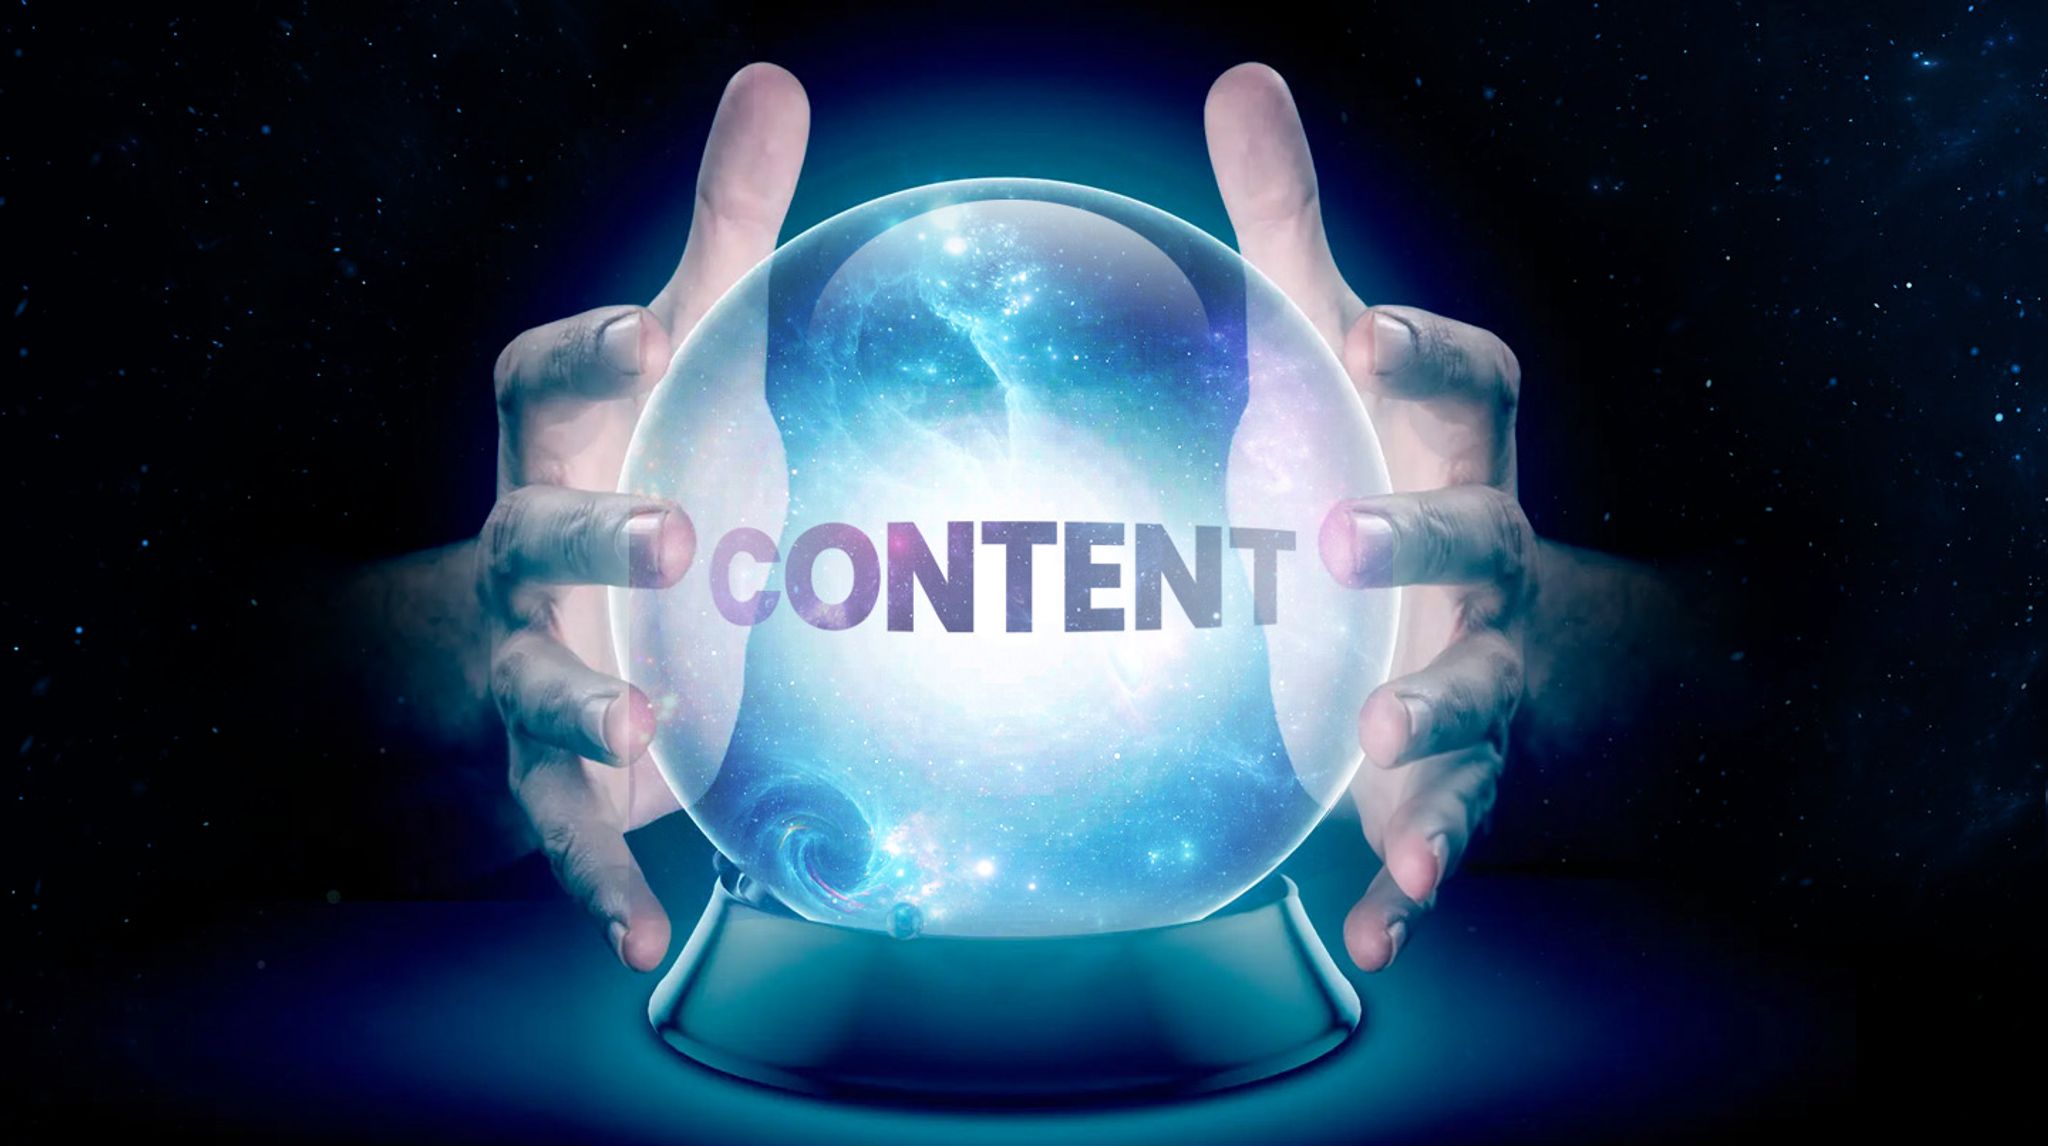 Image of a crystal ball with the word "content" floating in the center